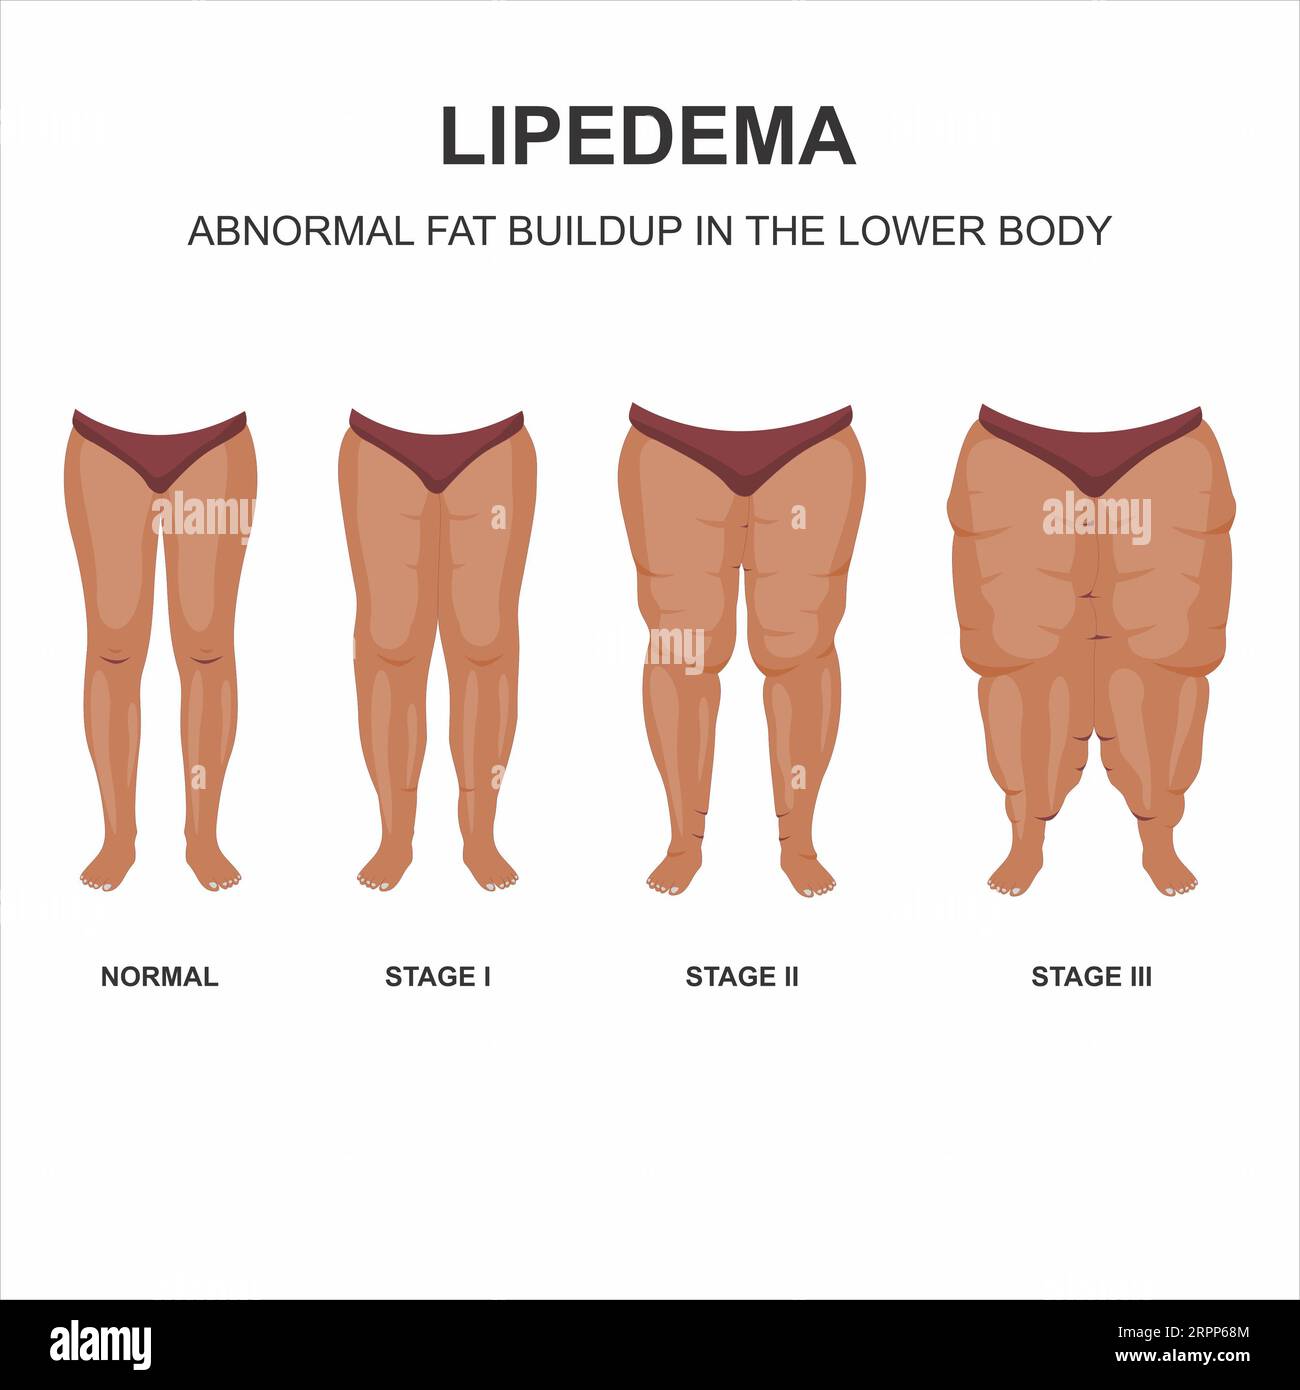 THE 4 STAGES OF LIPEDEMA-A CLOSER LOOK AT EACH ONE - Total